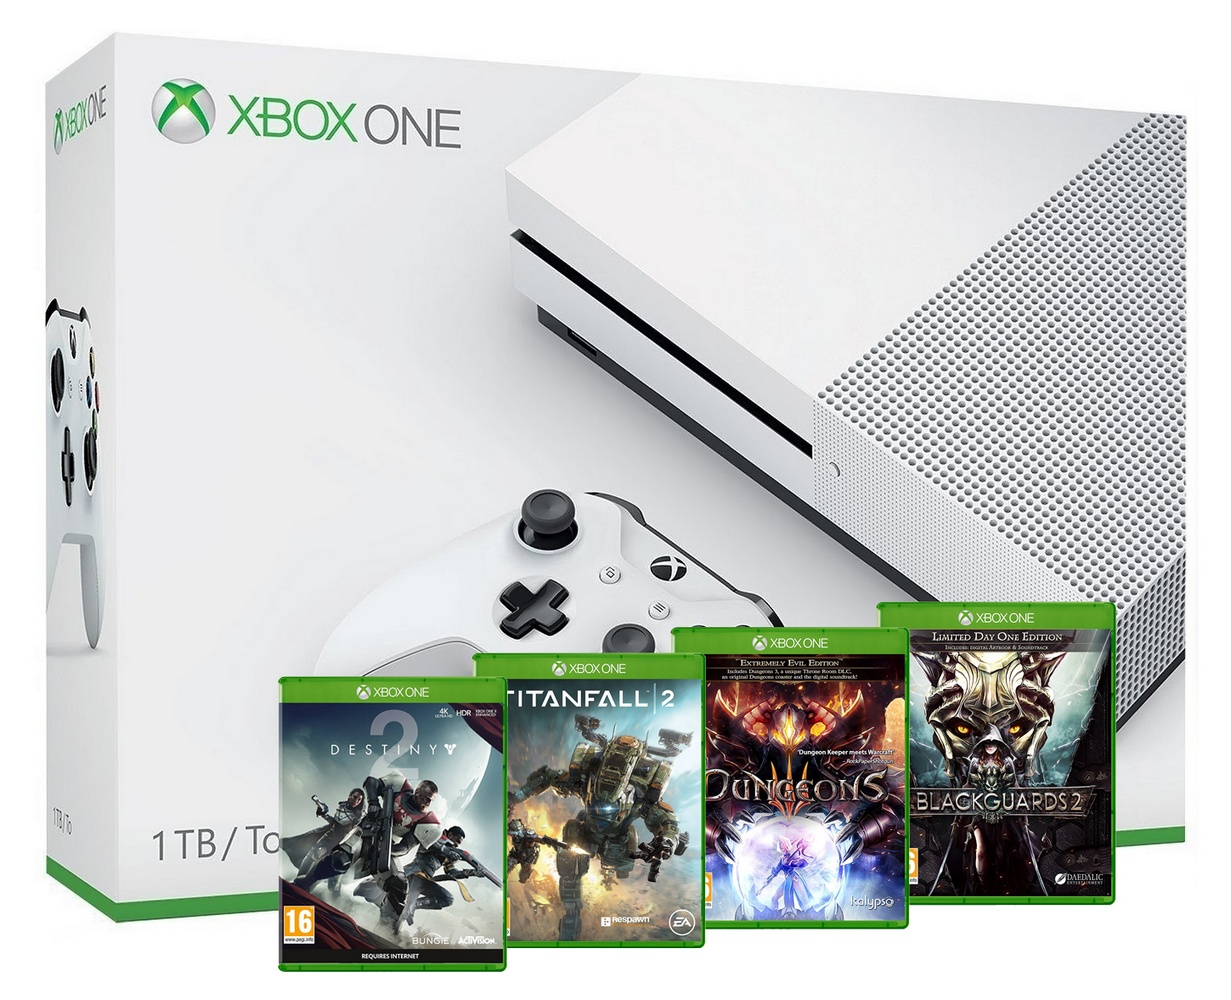 Xbox One S 1 TB - Destiny 2, Titanfall 2, Dungeons 3 and Blackguards 2 Bundle